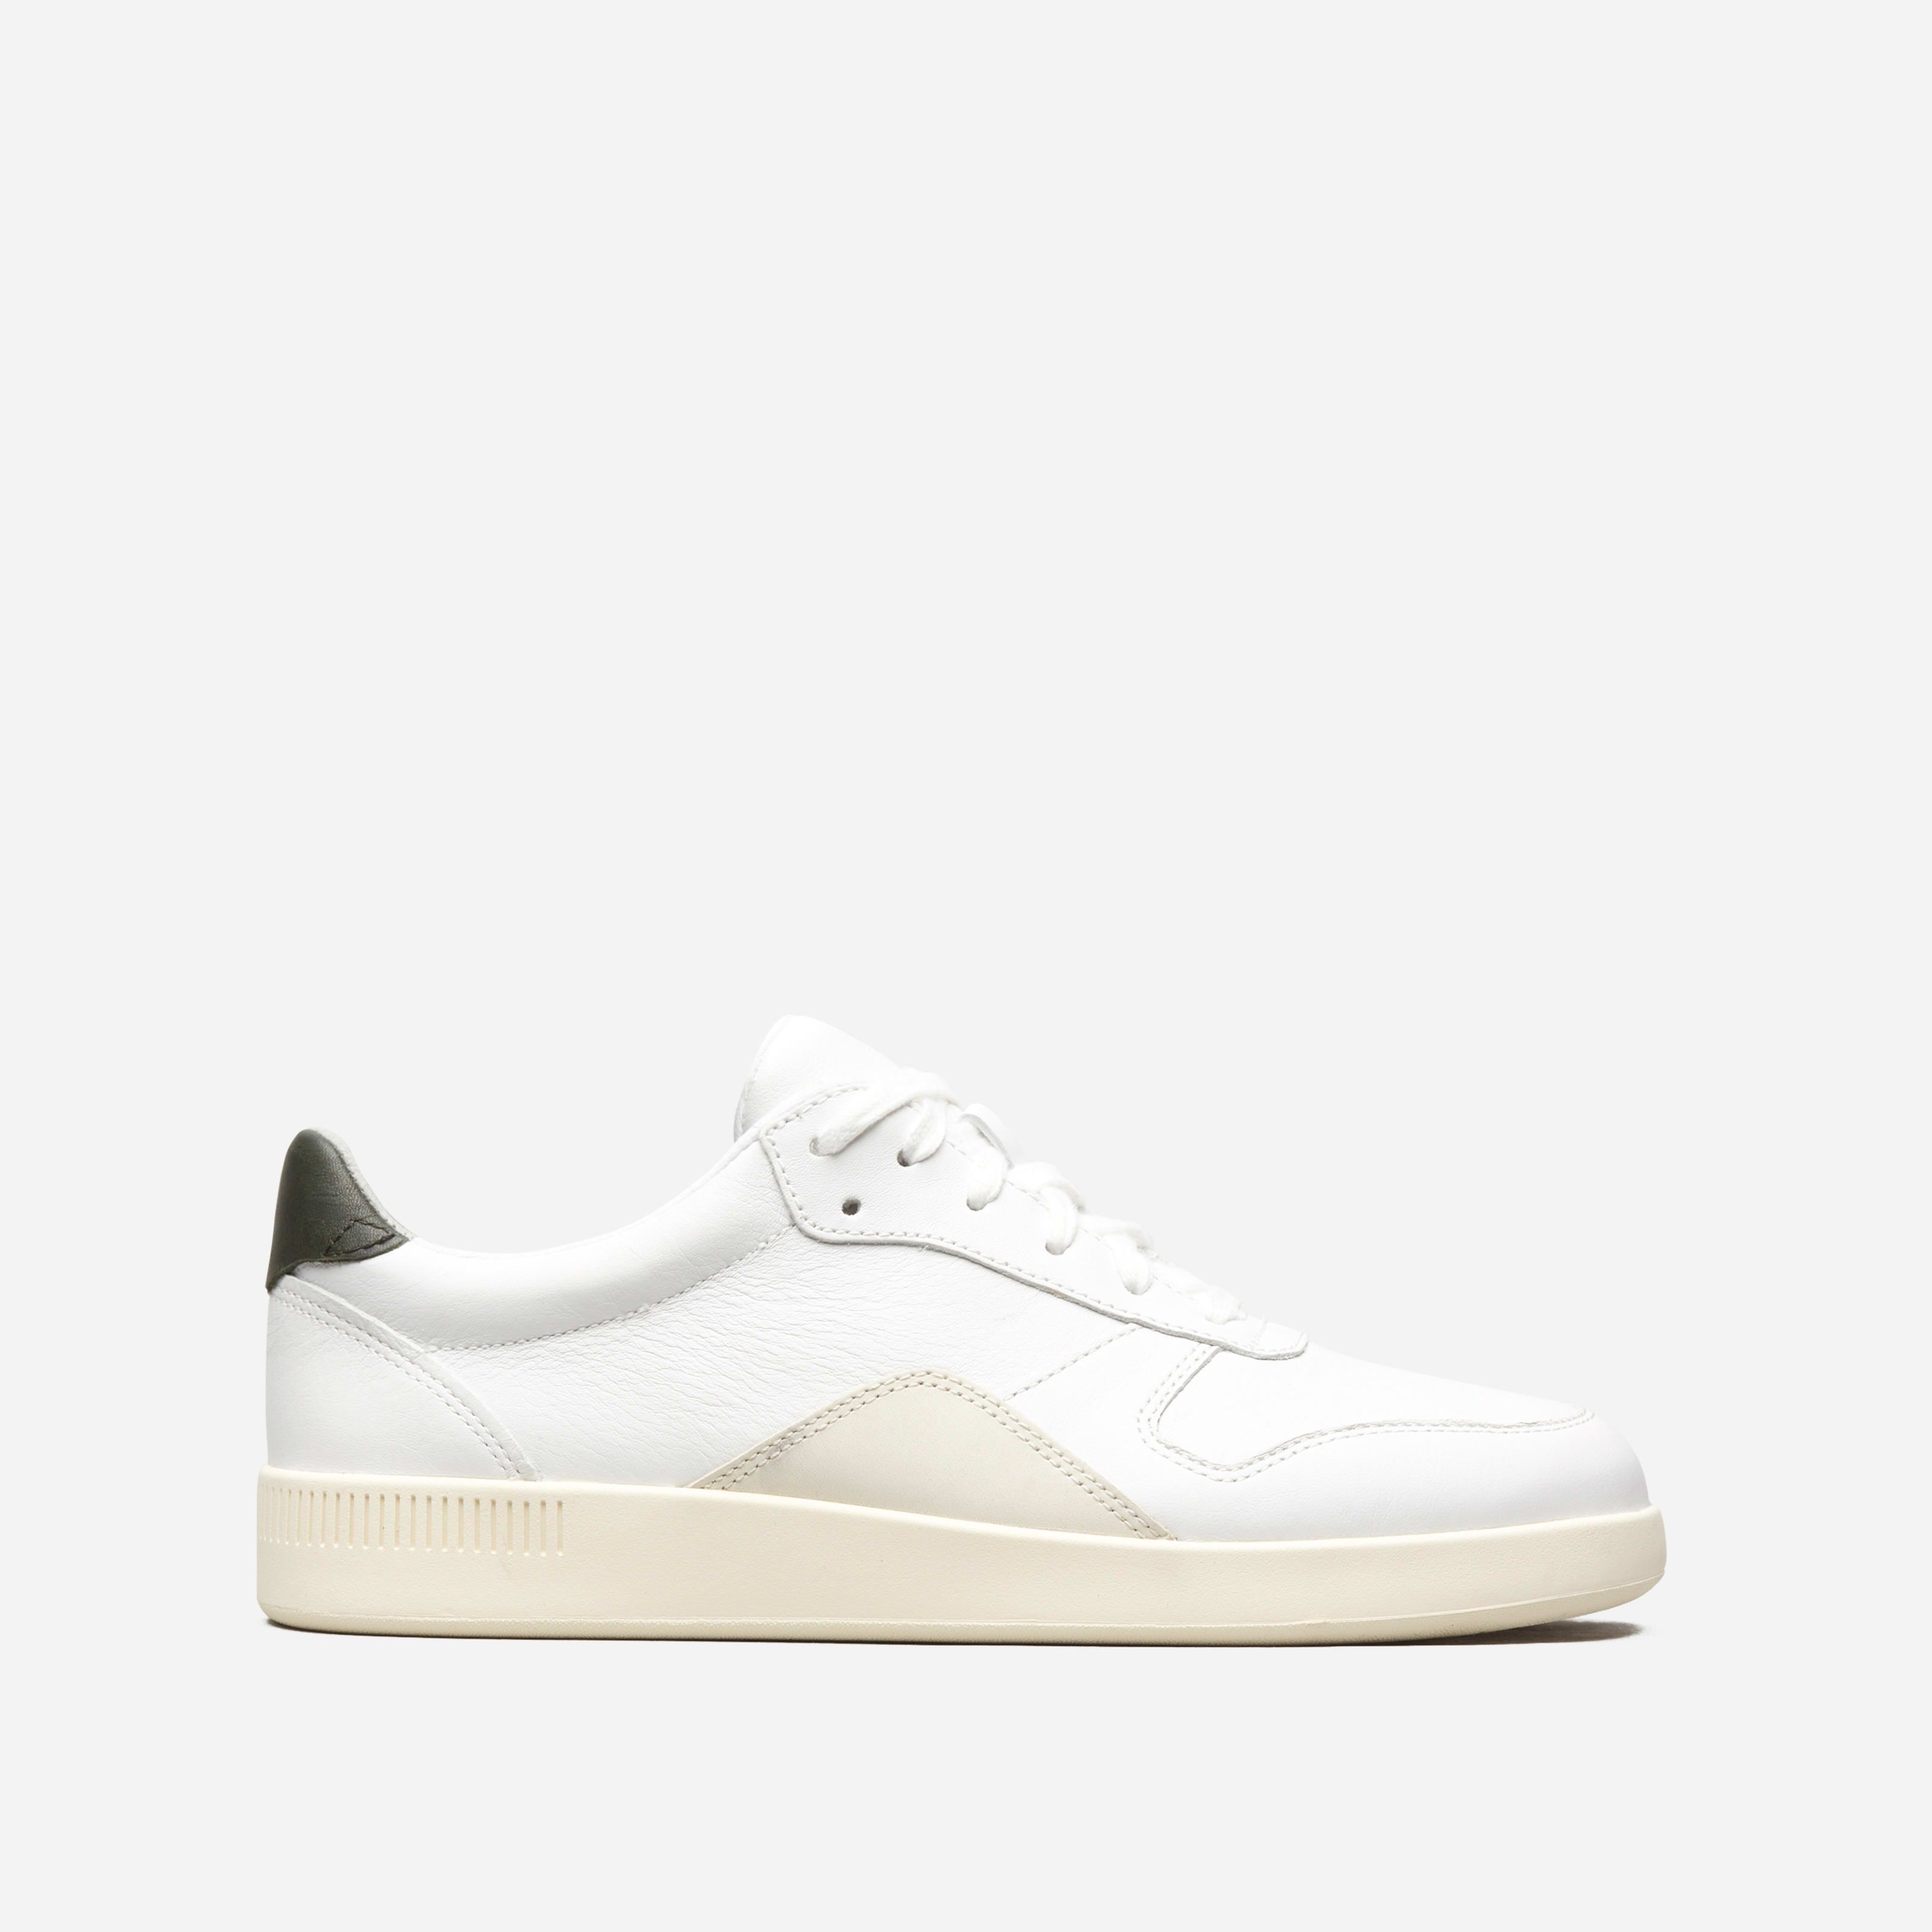 Women's Court Sneaker by Everlane in White/Forest, Size W10.5M8.5 | Everlane